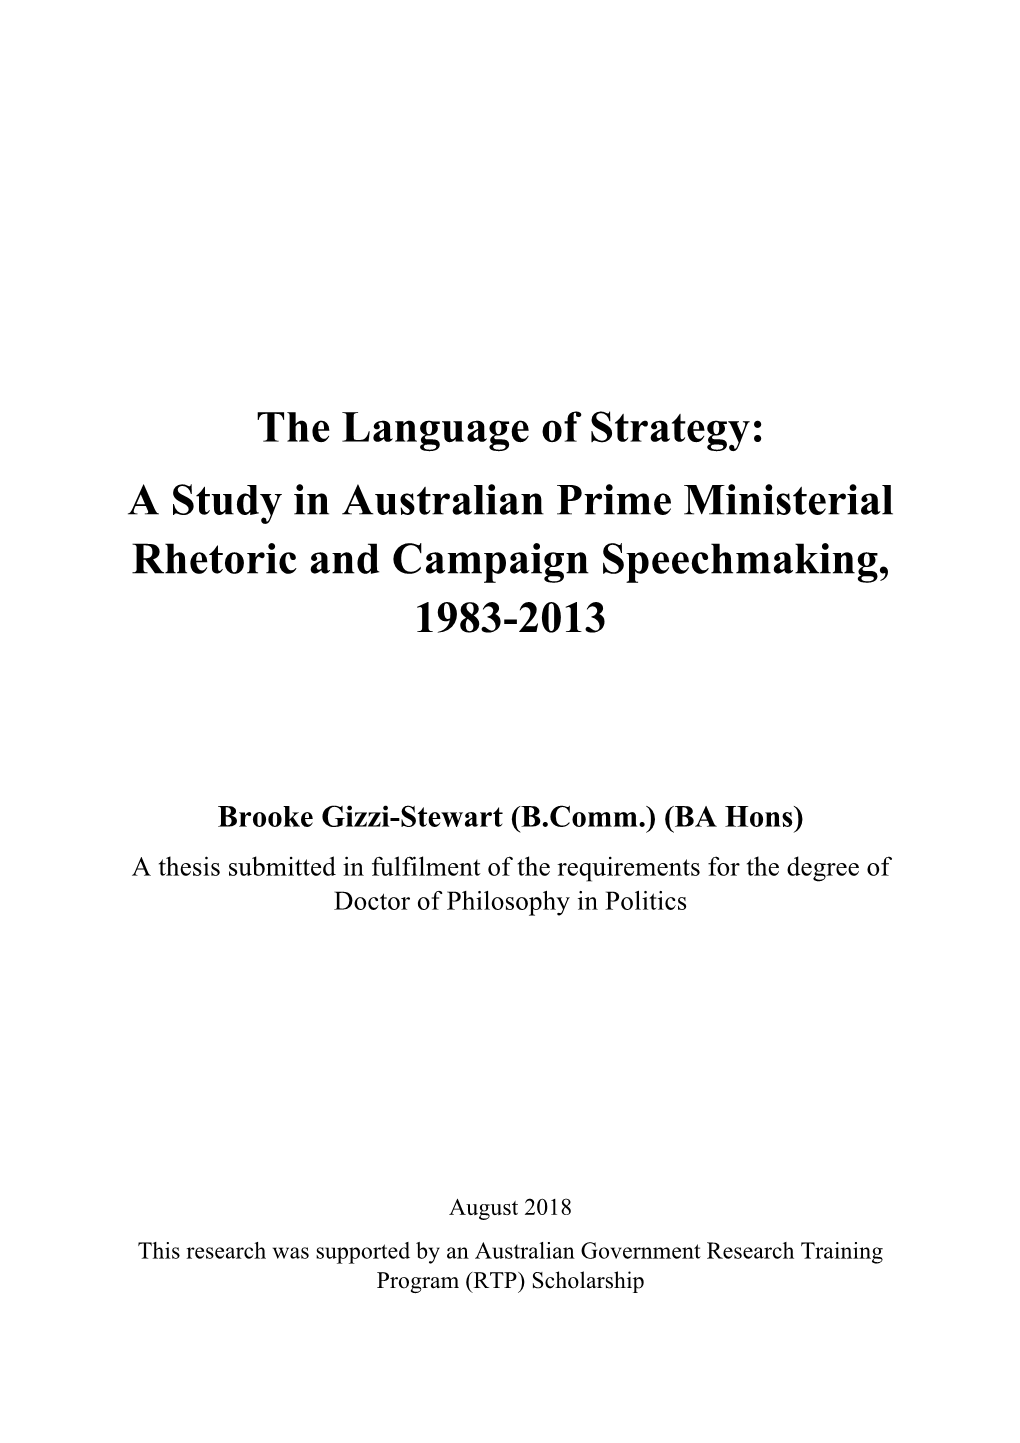 A Study in Australian Prime Ministerial Rhetoric and Campaign Speechmaking, 1983-2013